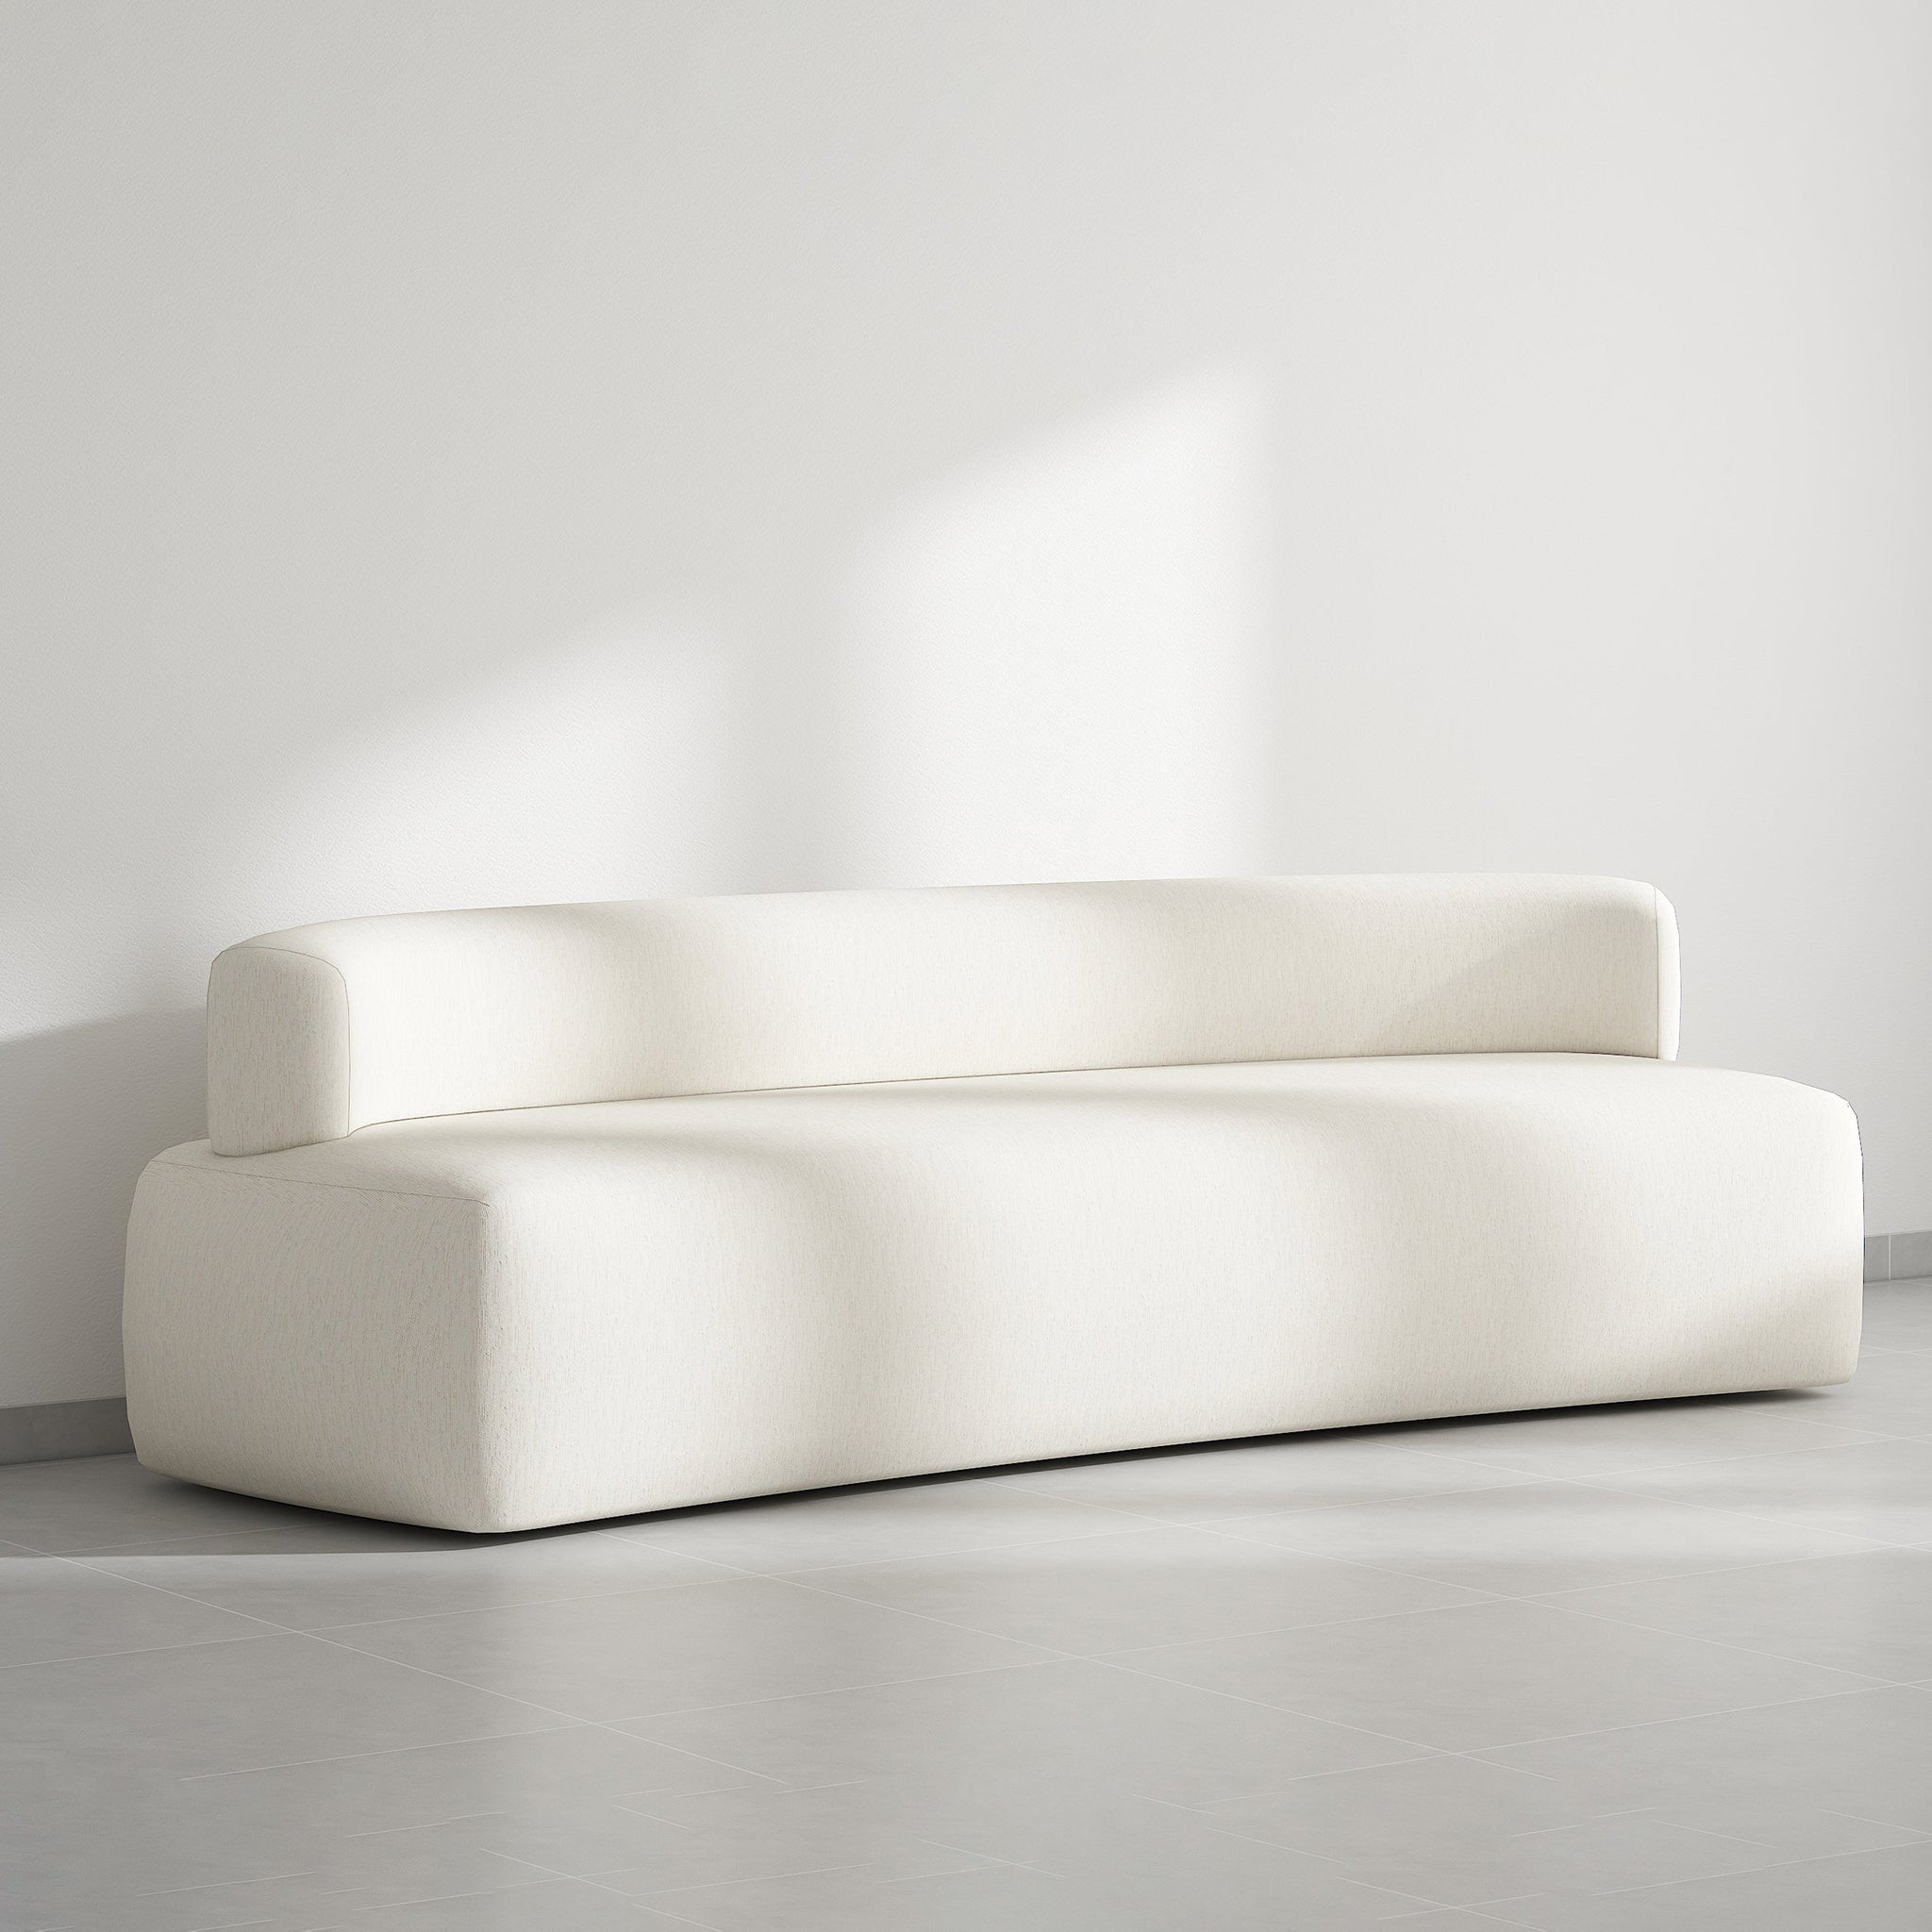 Contemporary white couch with a smooth, curved backrest